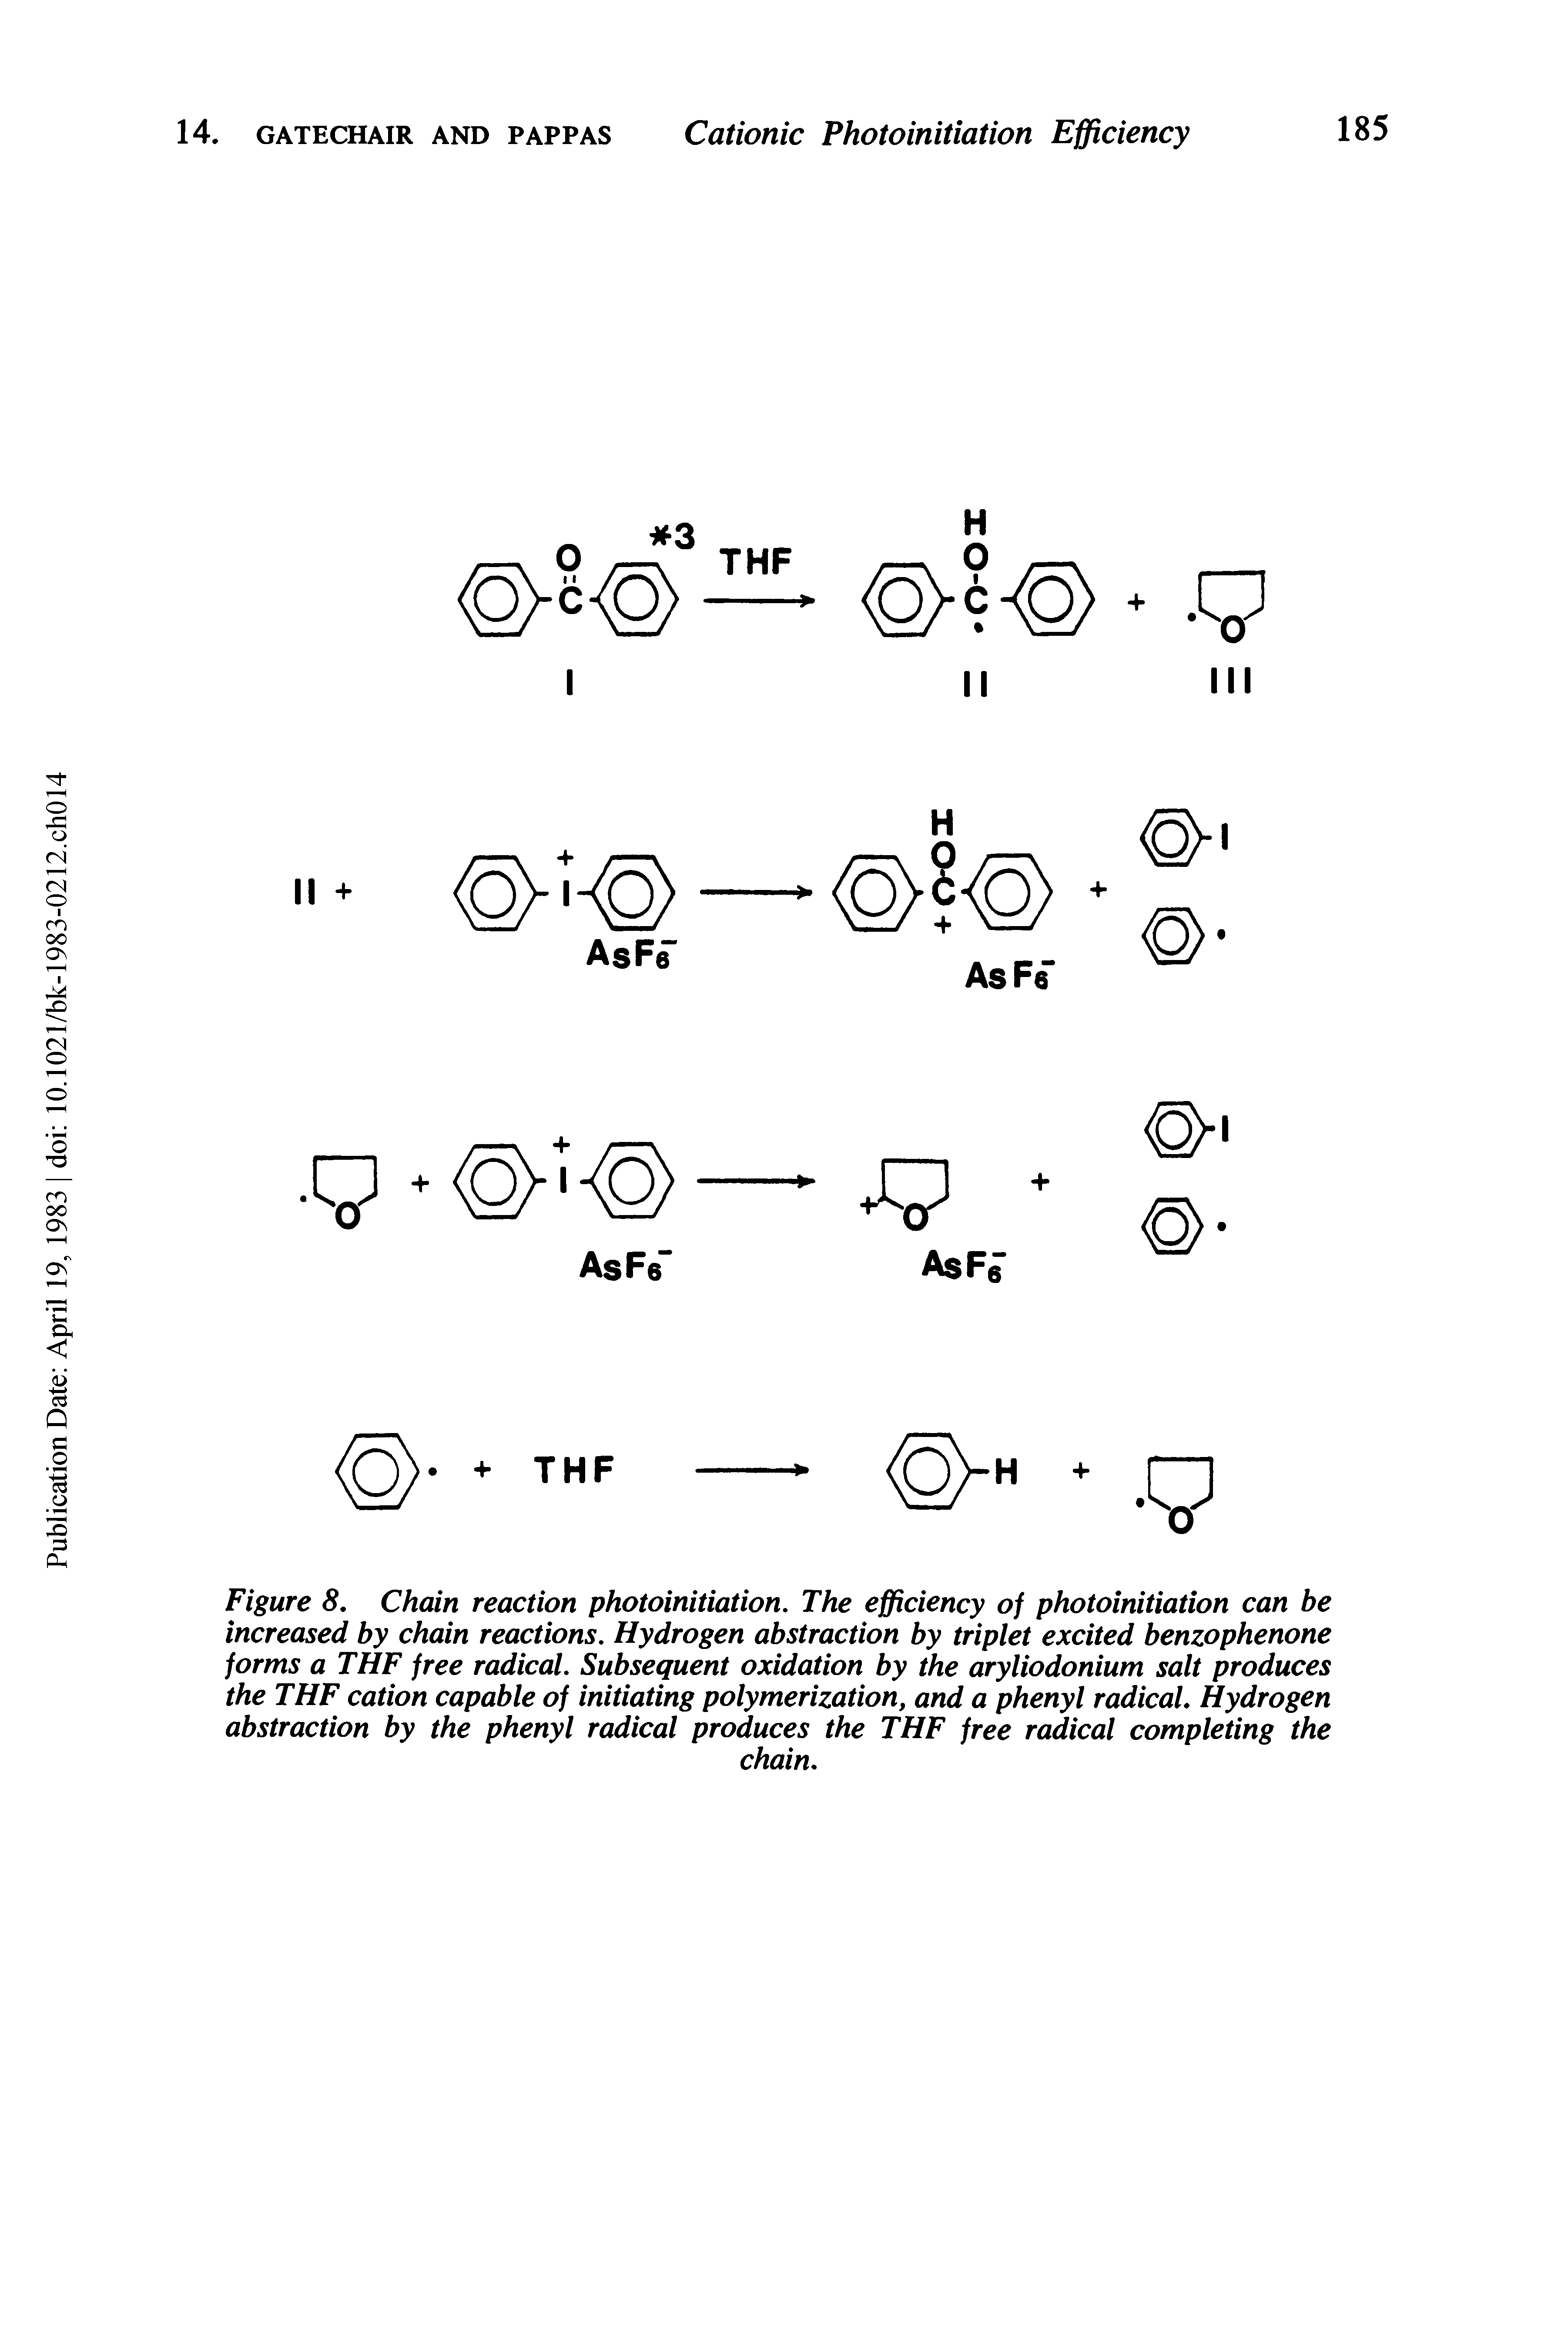 Figure 8, Chain reaction photoinitiation. The efficiency of photoinitiation can be increased by chain reactions. Hydrogen abstraction by triplet excited benzophenone forms a THF free radical. Subsequent oxidation by the aryliodonium salt produces the THF cation capable of initiating polymerization, and a phenyl radical. Hydrogen abstraction by the phenyl radical produces the THF free radical completing the...